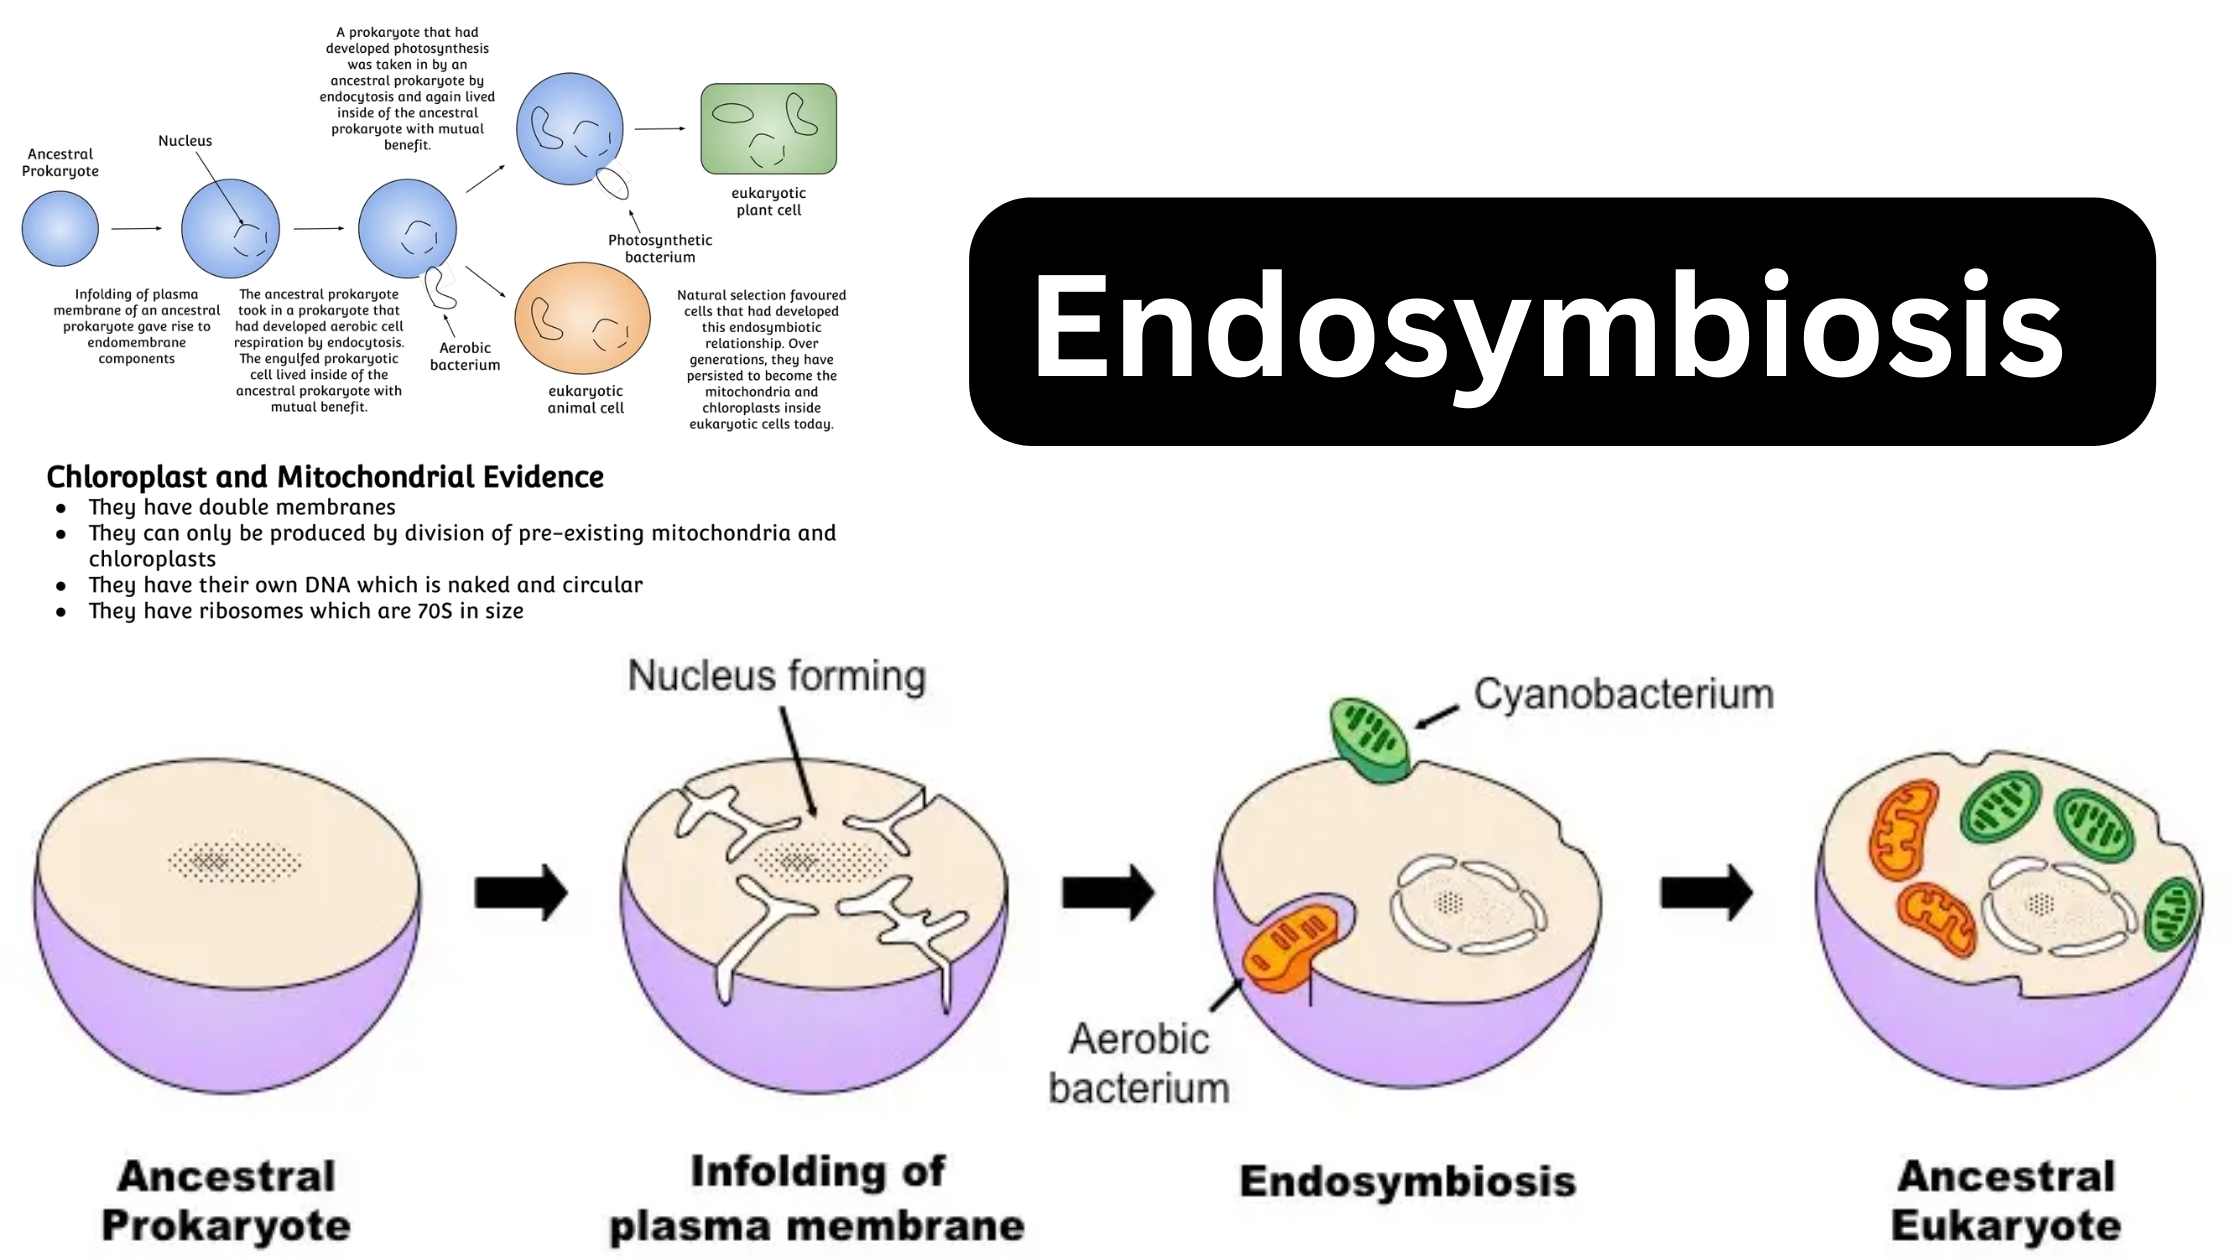 Endosymbiosis - Definition, Theory, Evidence, Examples